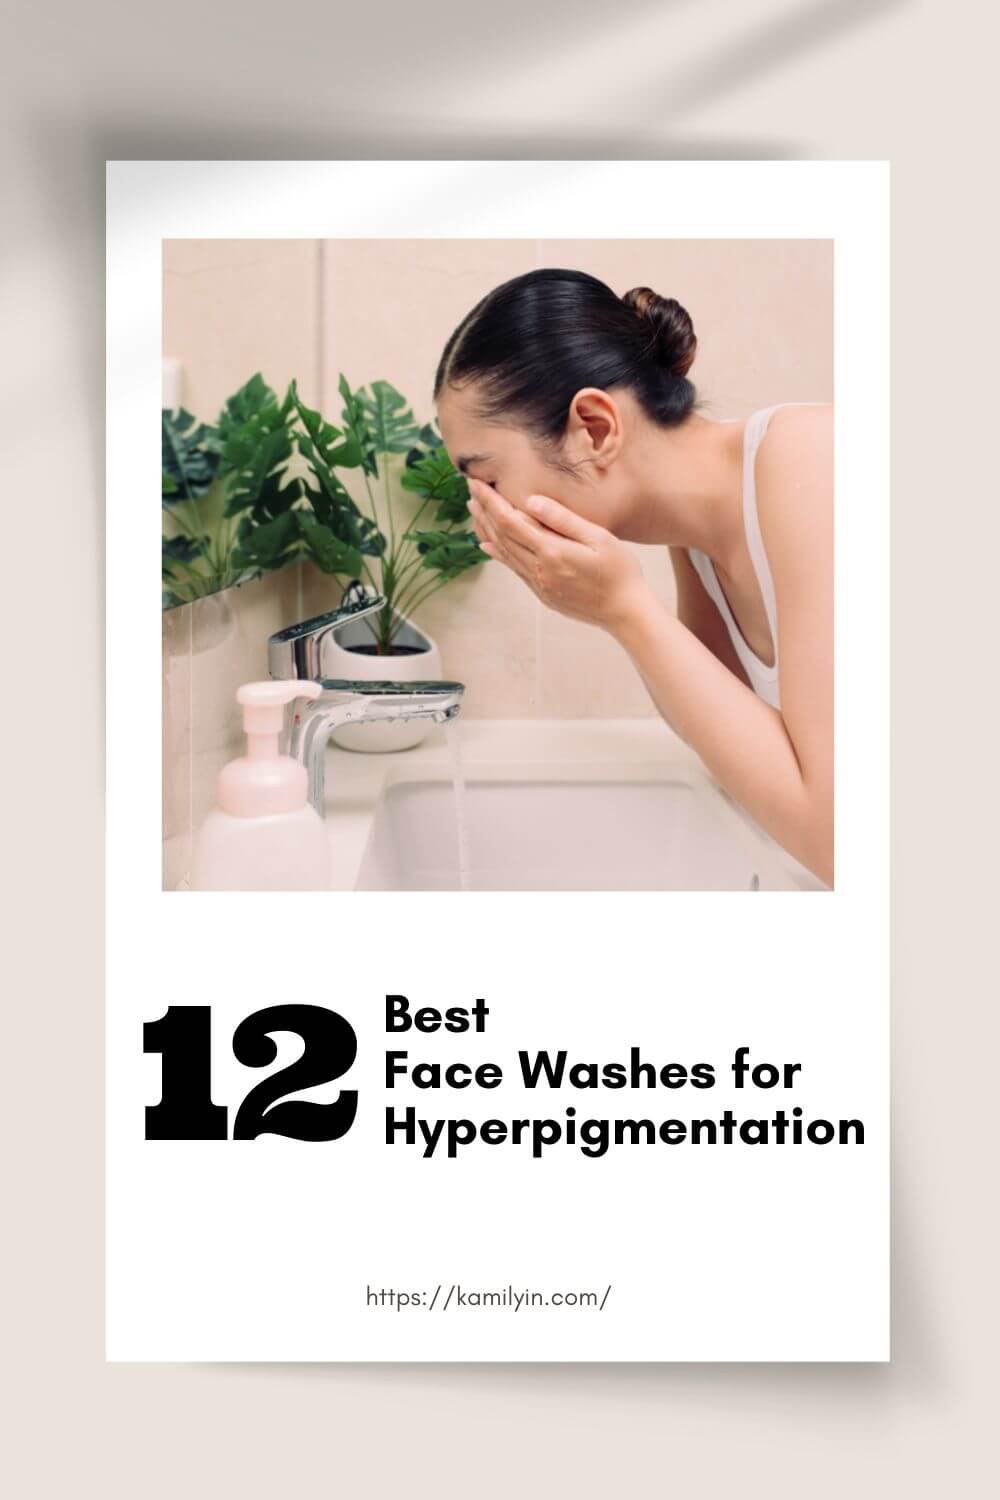 Best Face Washes for Hyperpigmentation